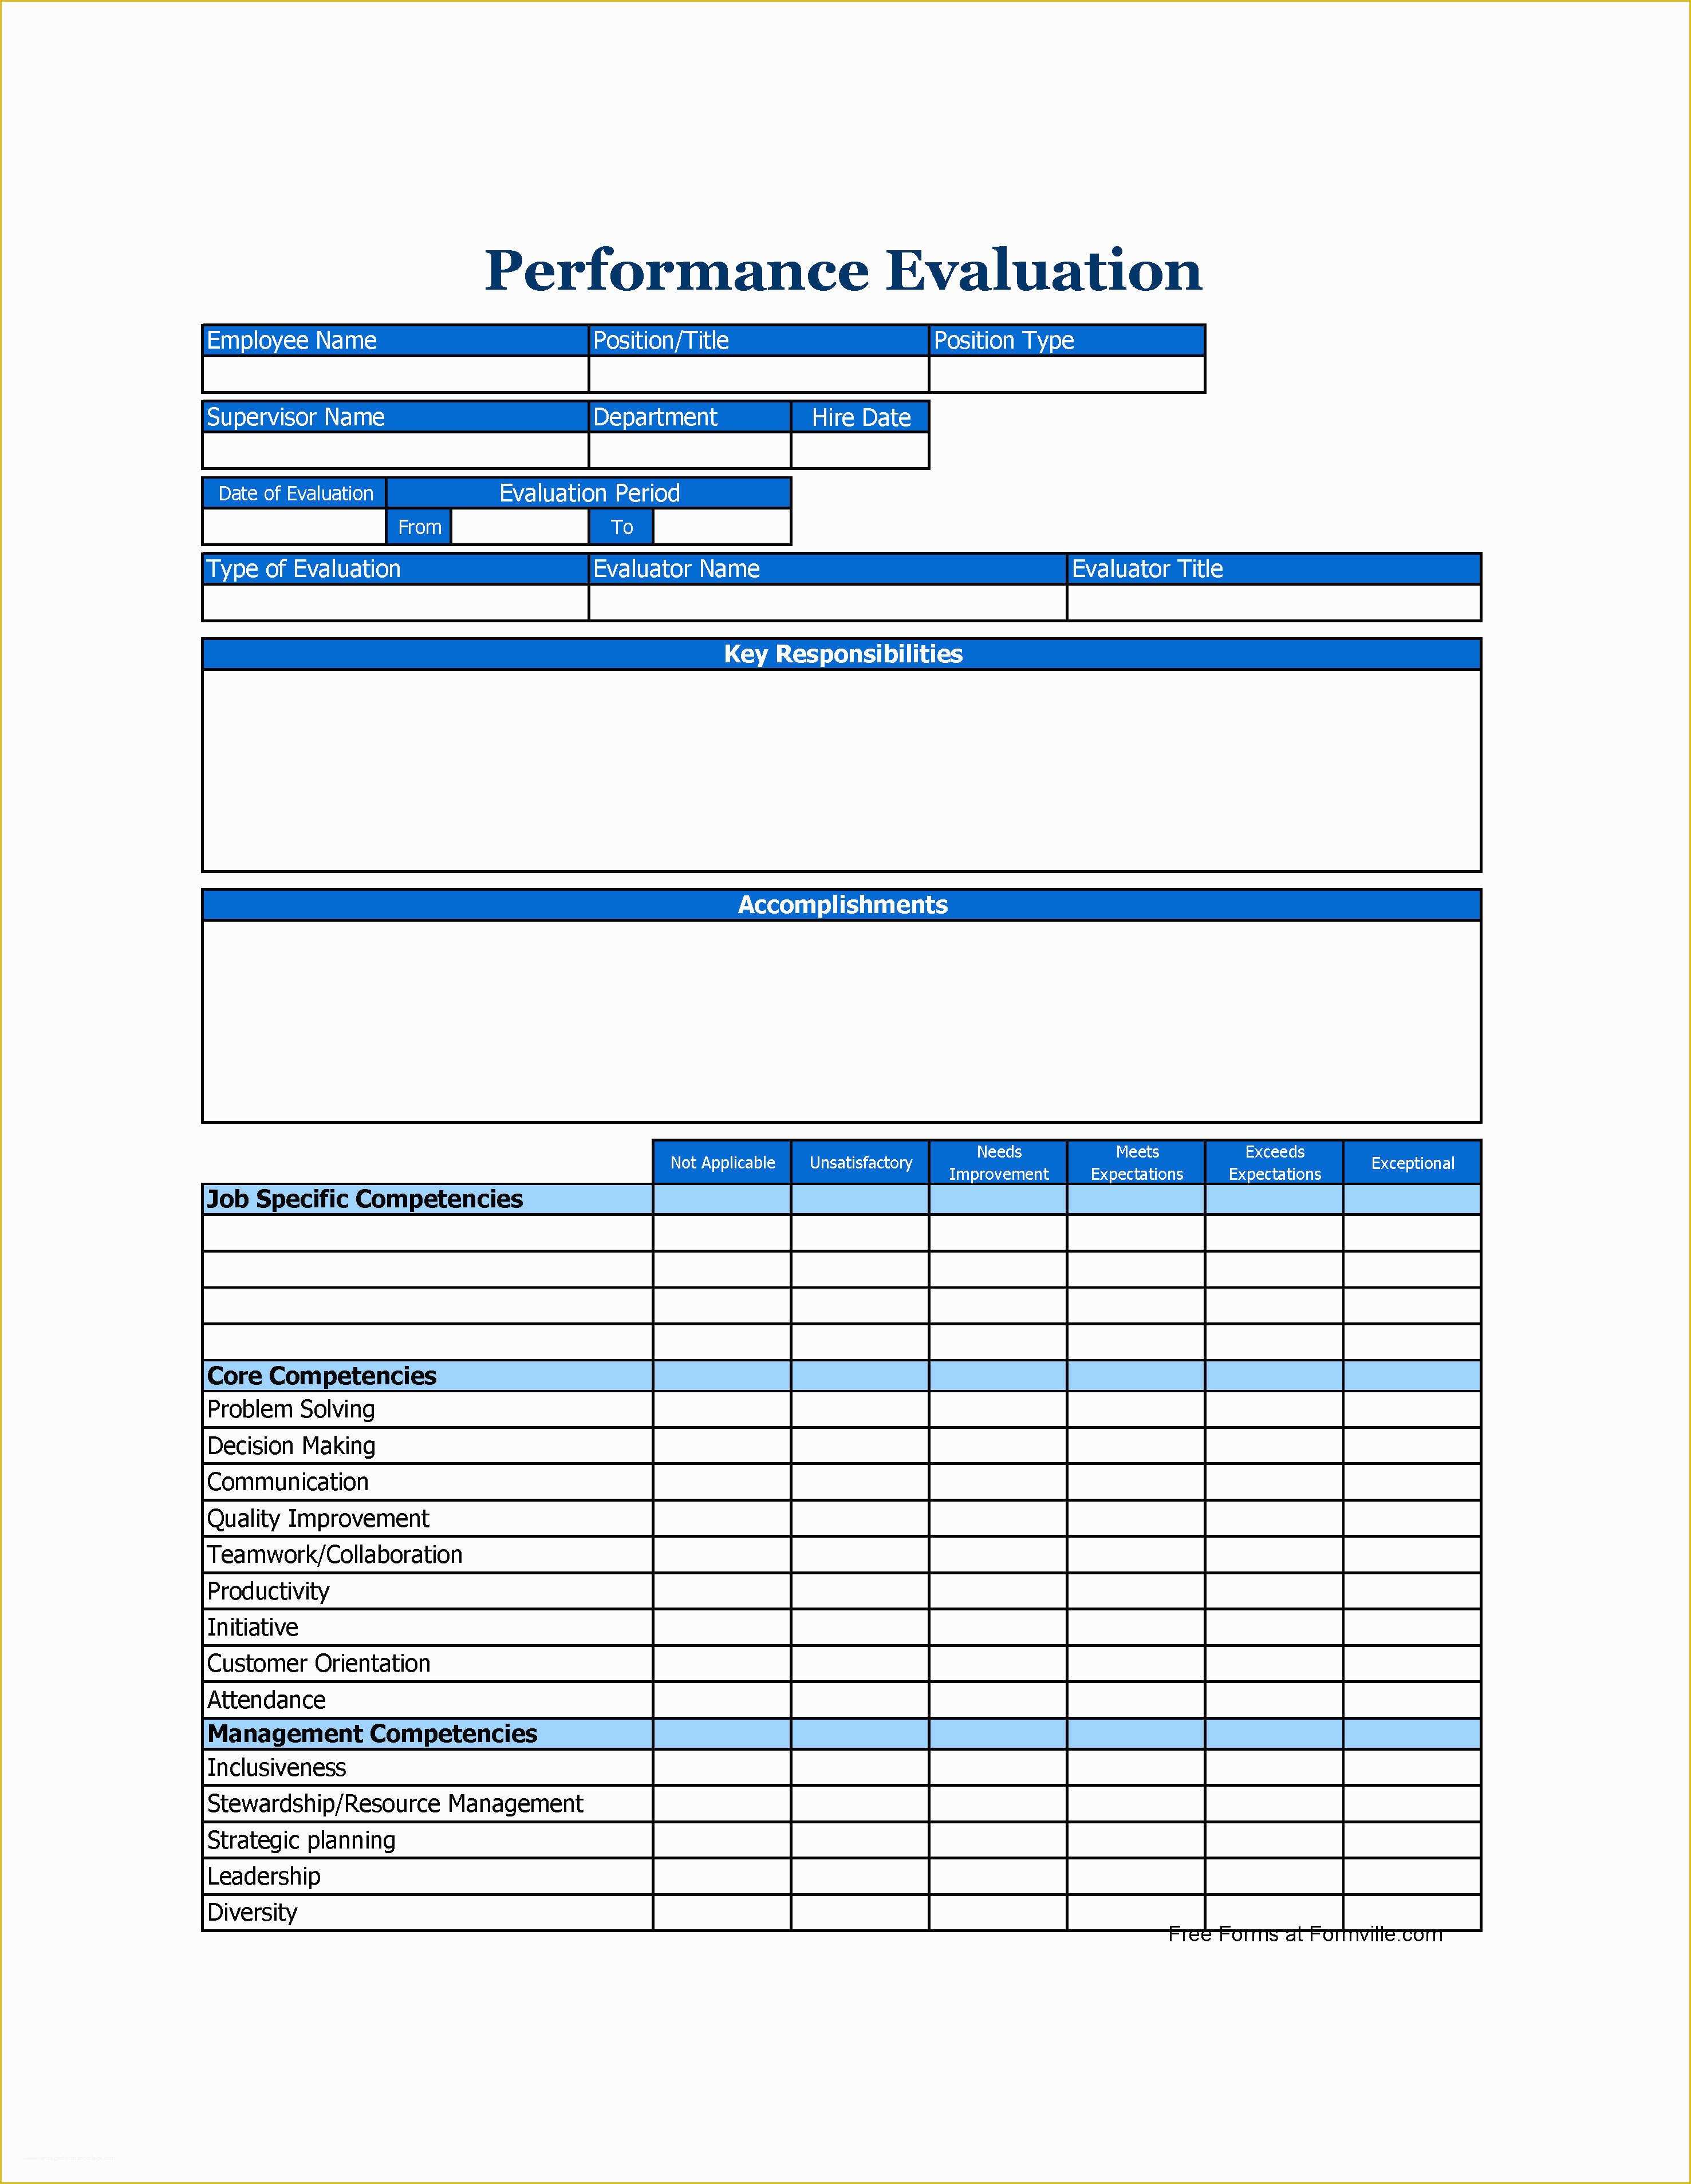 Free Employee Review Template Of 46 Employee Evaluation forms & Performance Review Examples